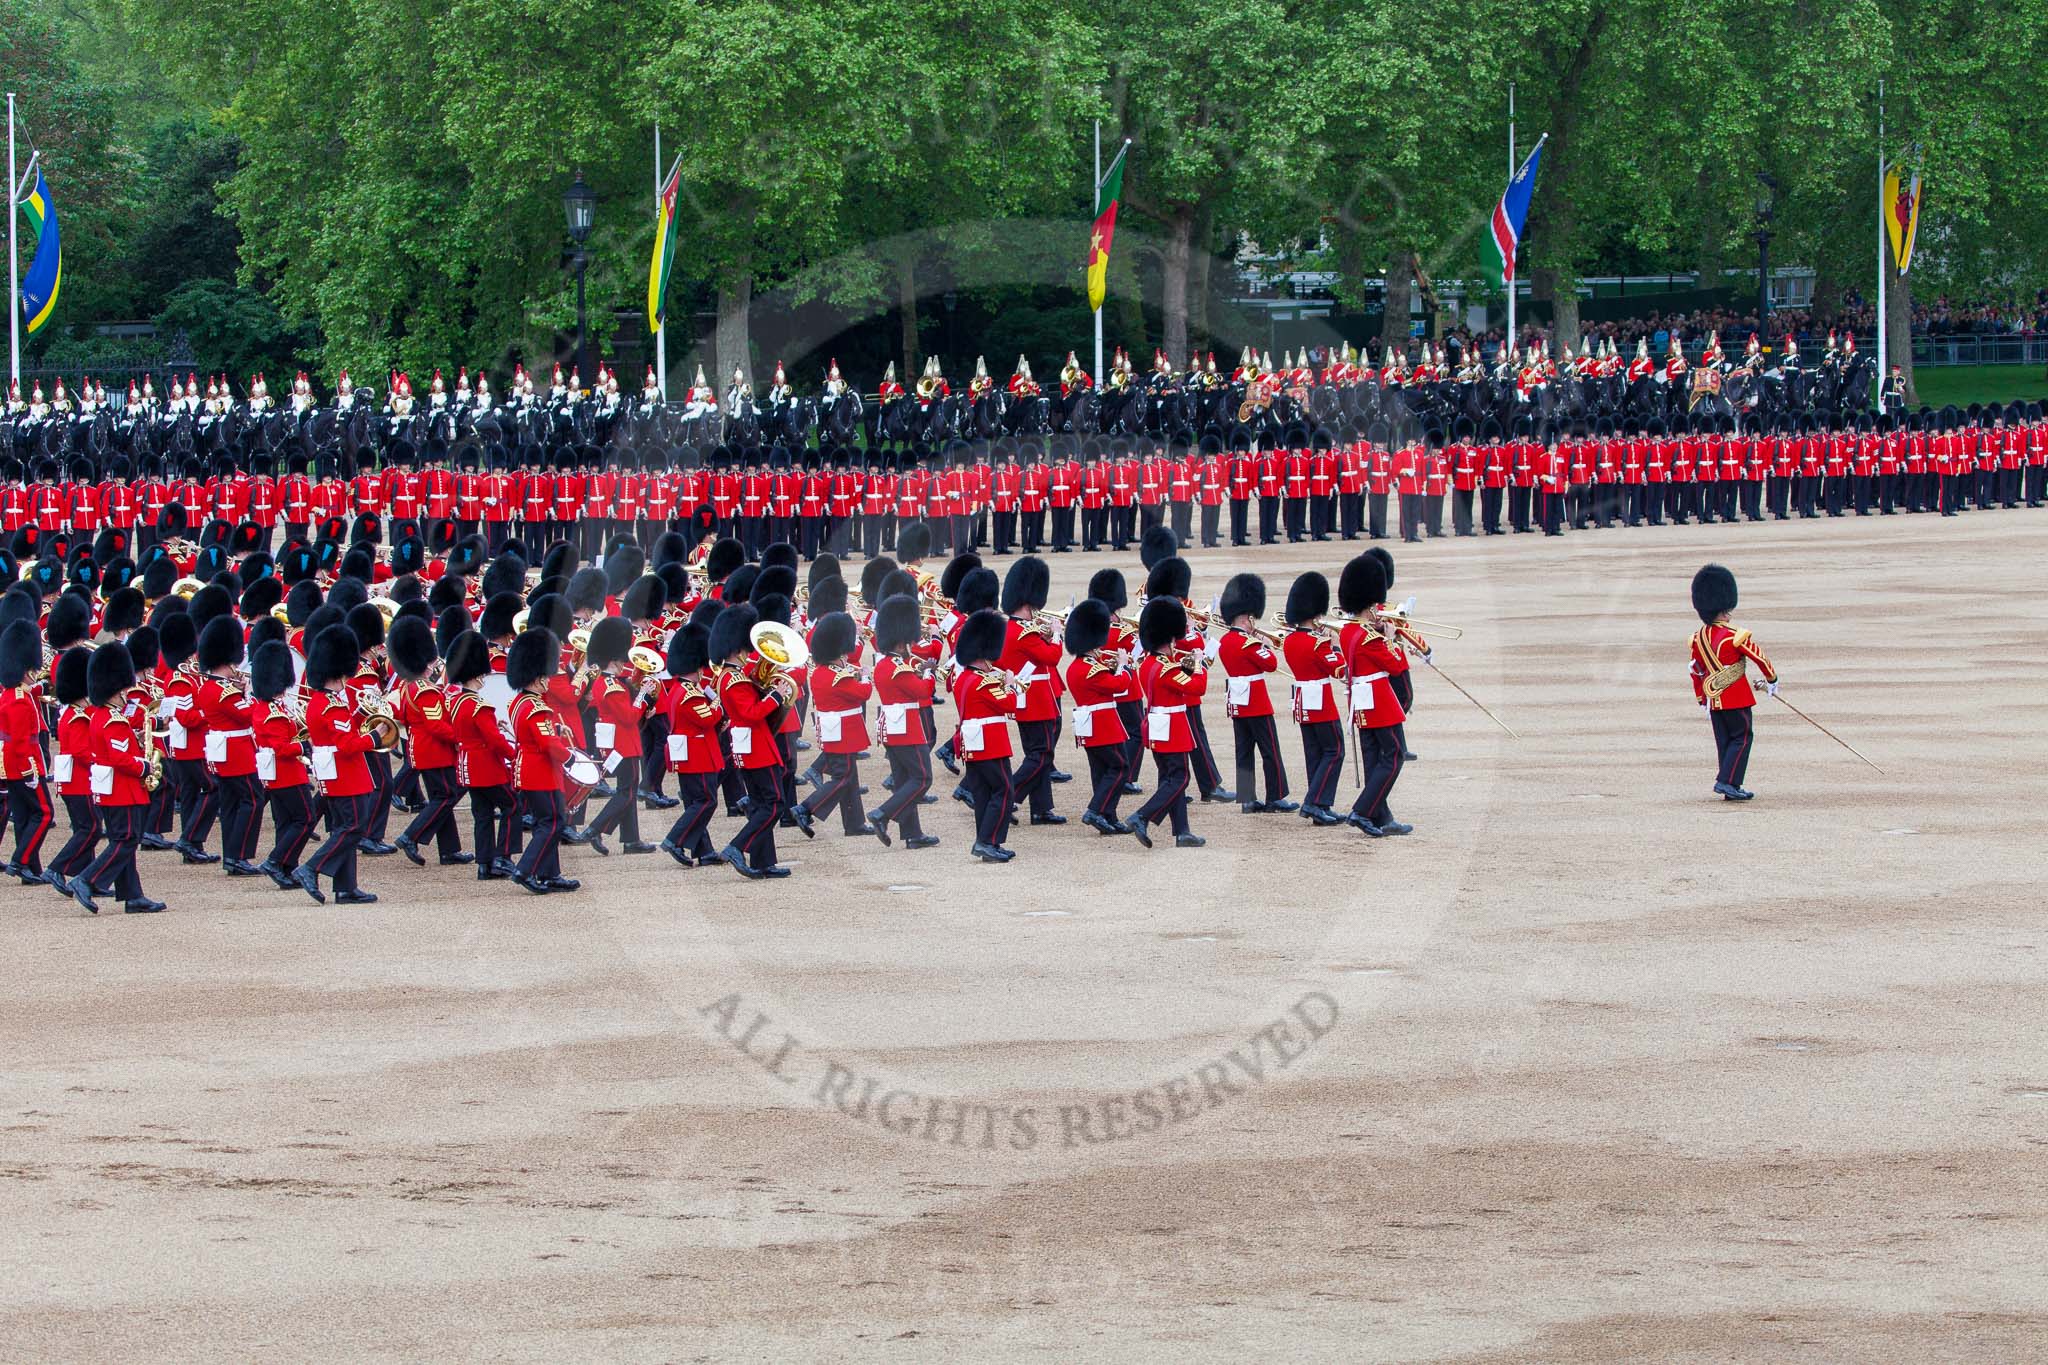 Major General's Review 2013: The Massed Band Troop begins with the slow march - the Waltz from Les Huguenots. The Field Officer, and behind him the Third and Fourth Division of the Sovereign's Escort, The Blues and Royals, can be seen on top of the image..
Horse Guards Parade, Westminster,
London SW1,

United Kingdom,
on 01 June 2013 at 11:08, image #320